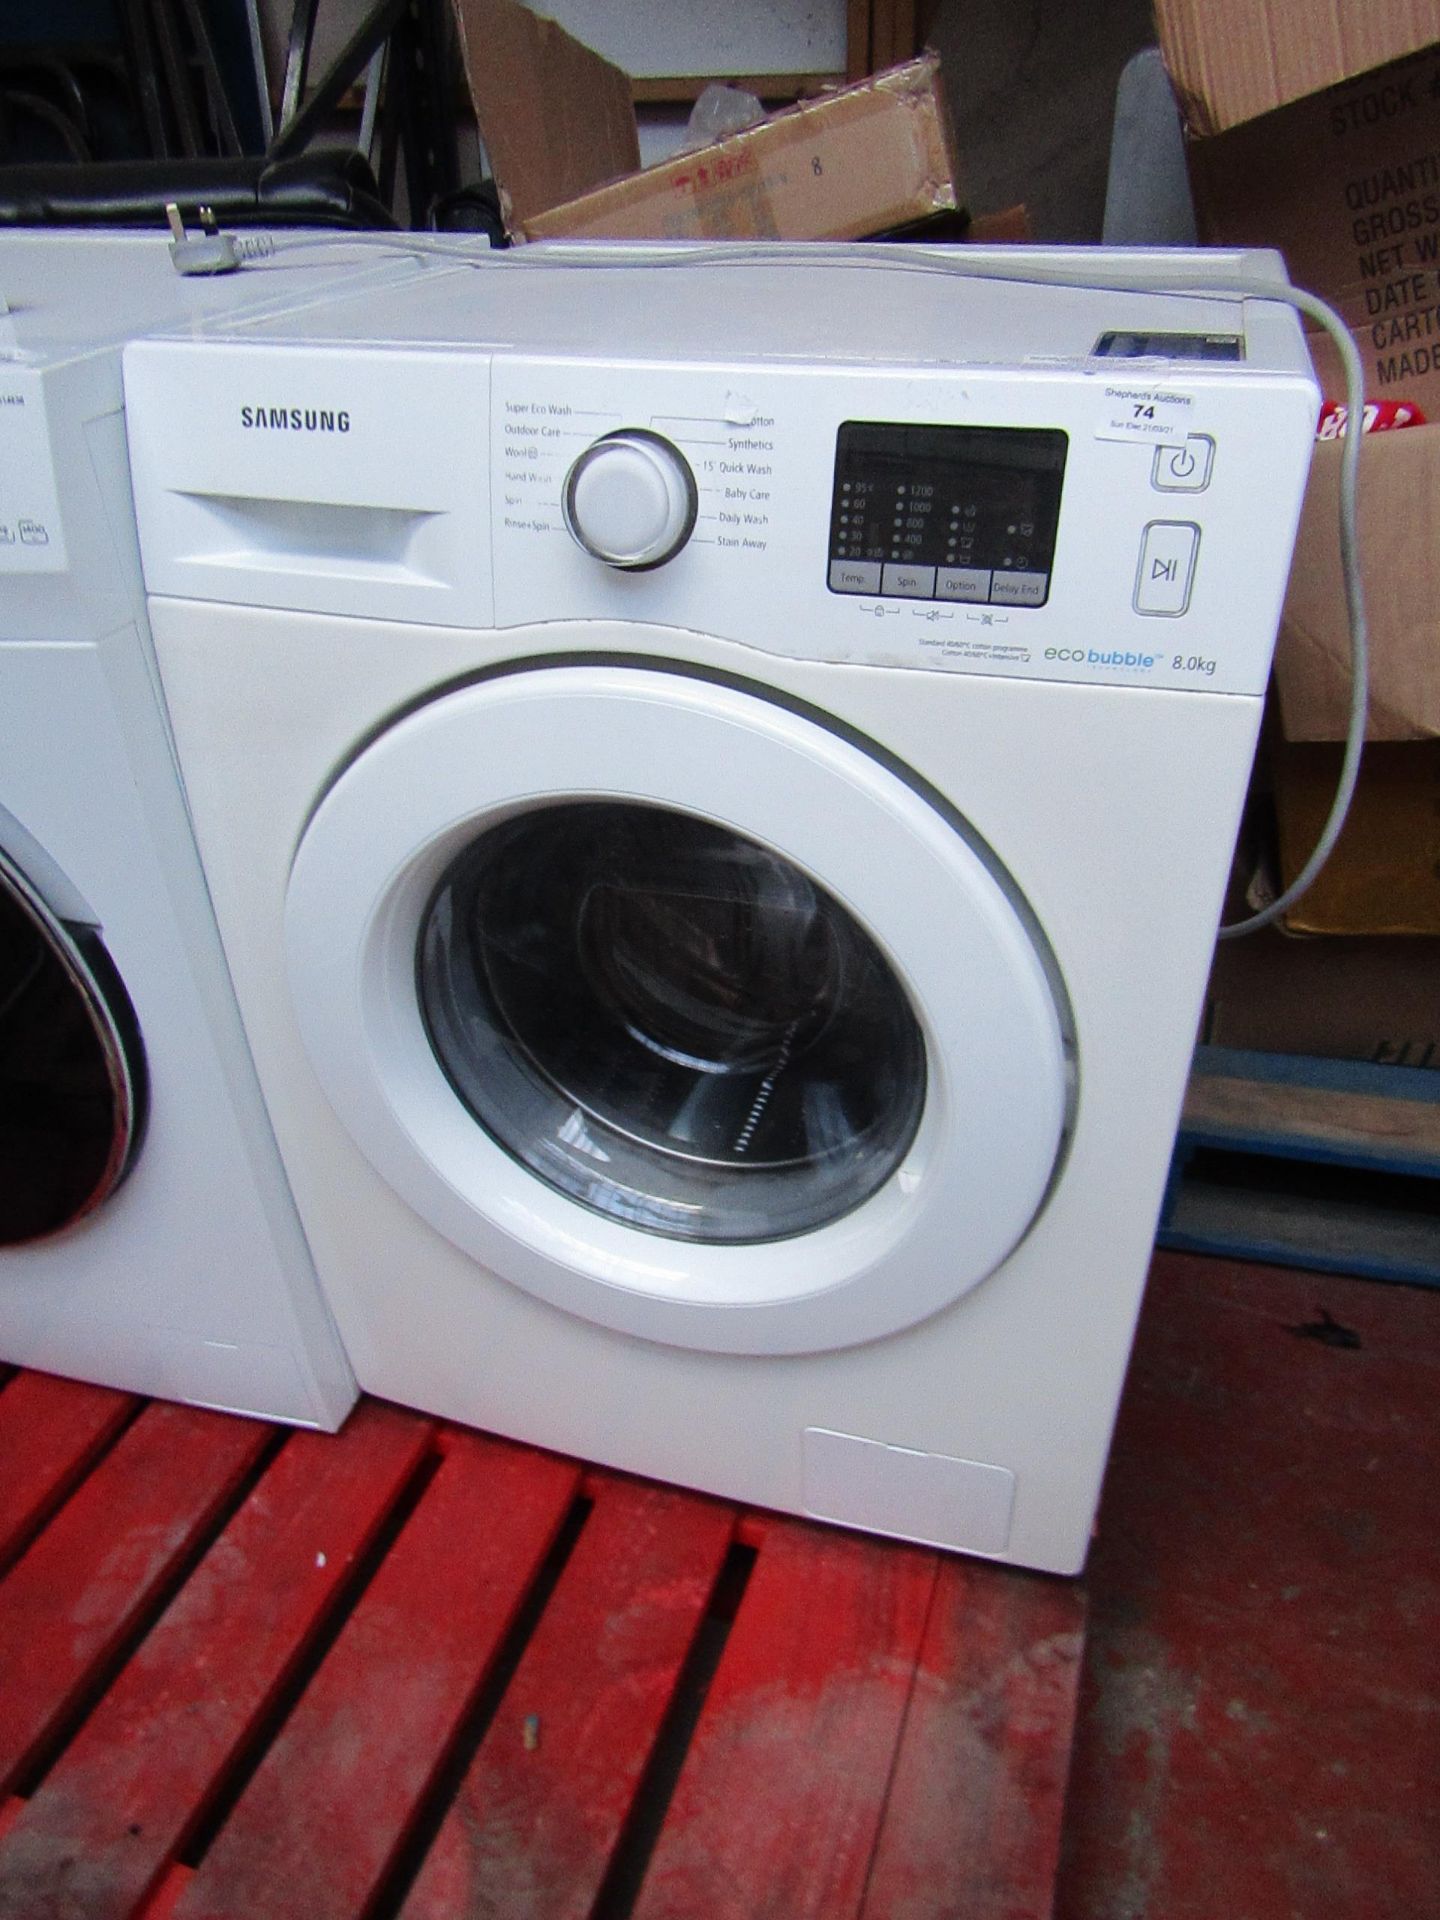 Samsung Eco Bubble 8Kg washing Machine, Power son and Spins, the vendor has informed us that the